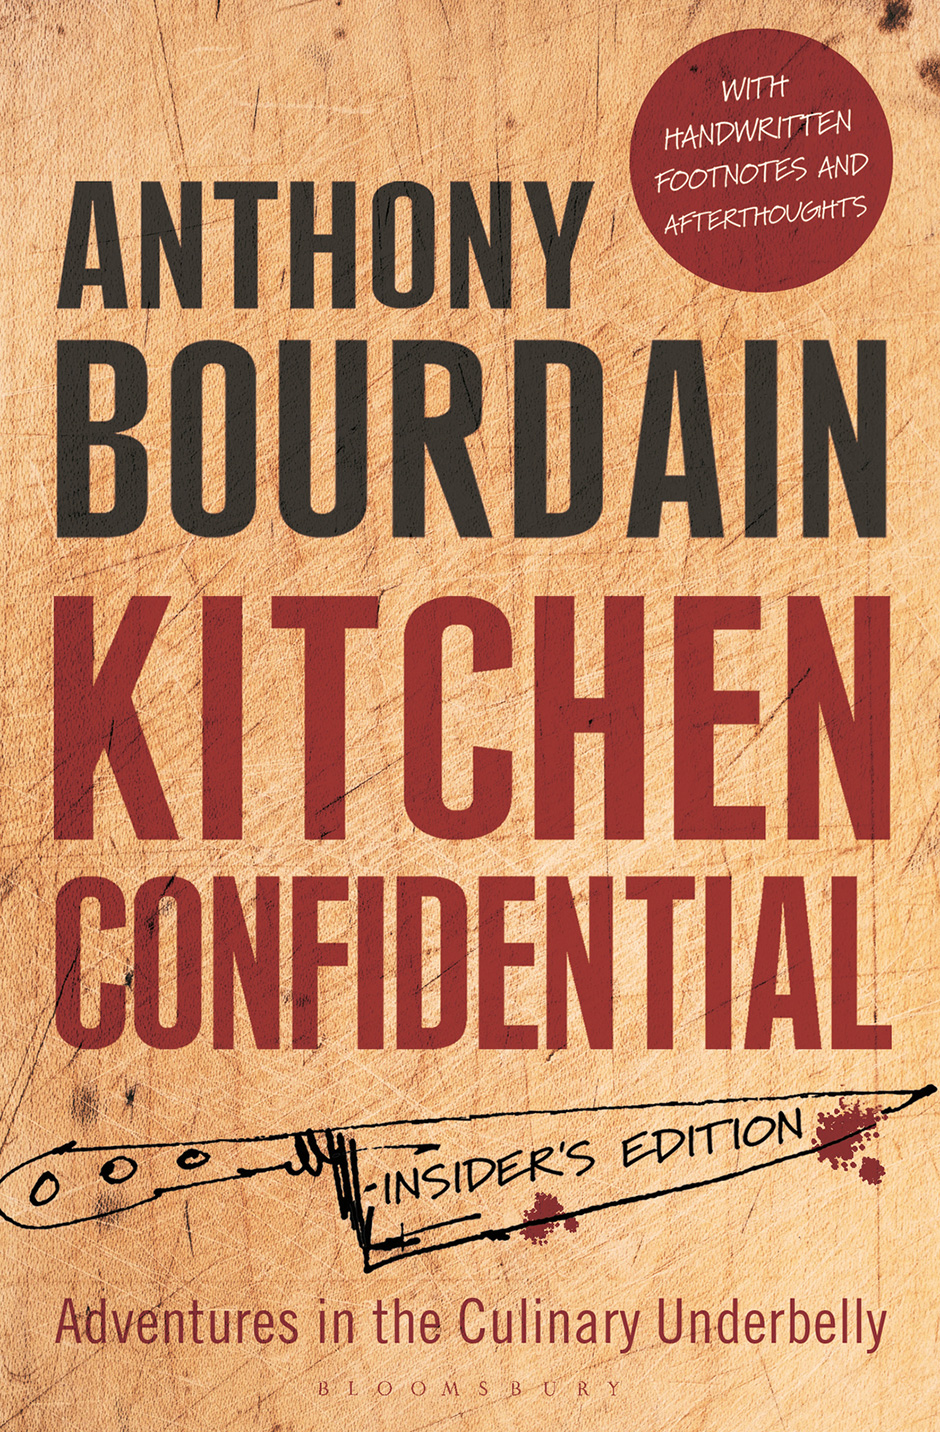 Kitchen Confidential by Anthony Bourdain is Aaron Herrington's book choice for his 'Offerings' interview